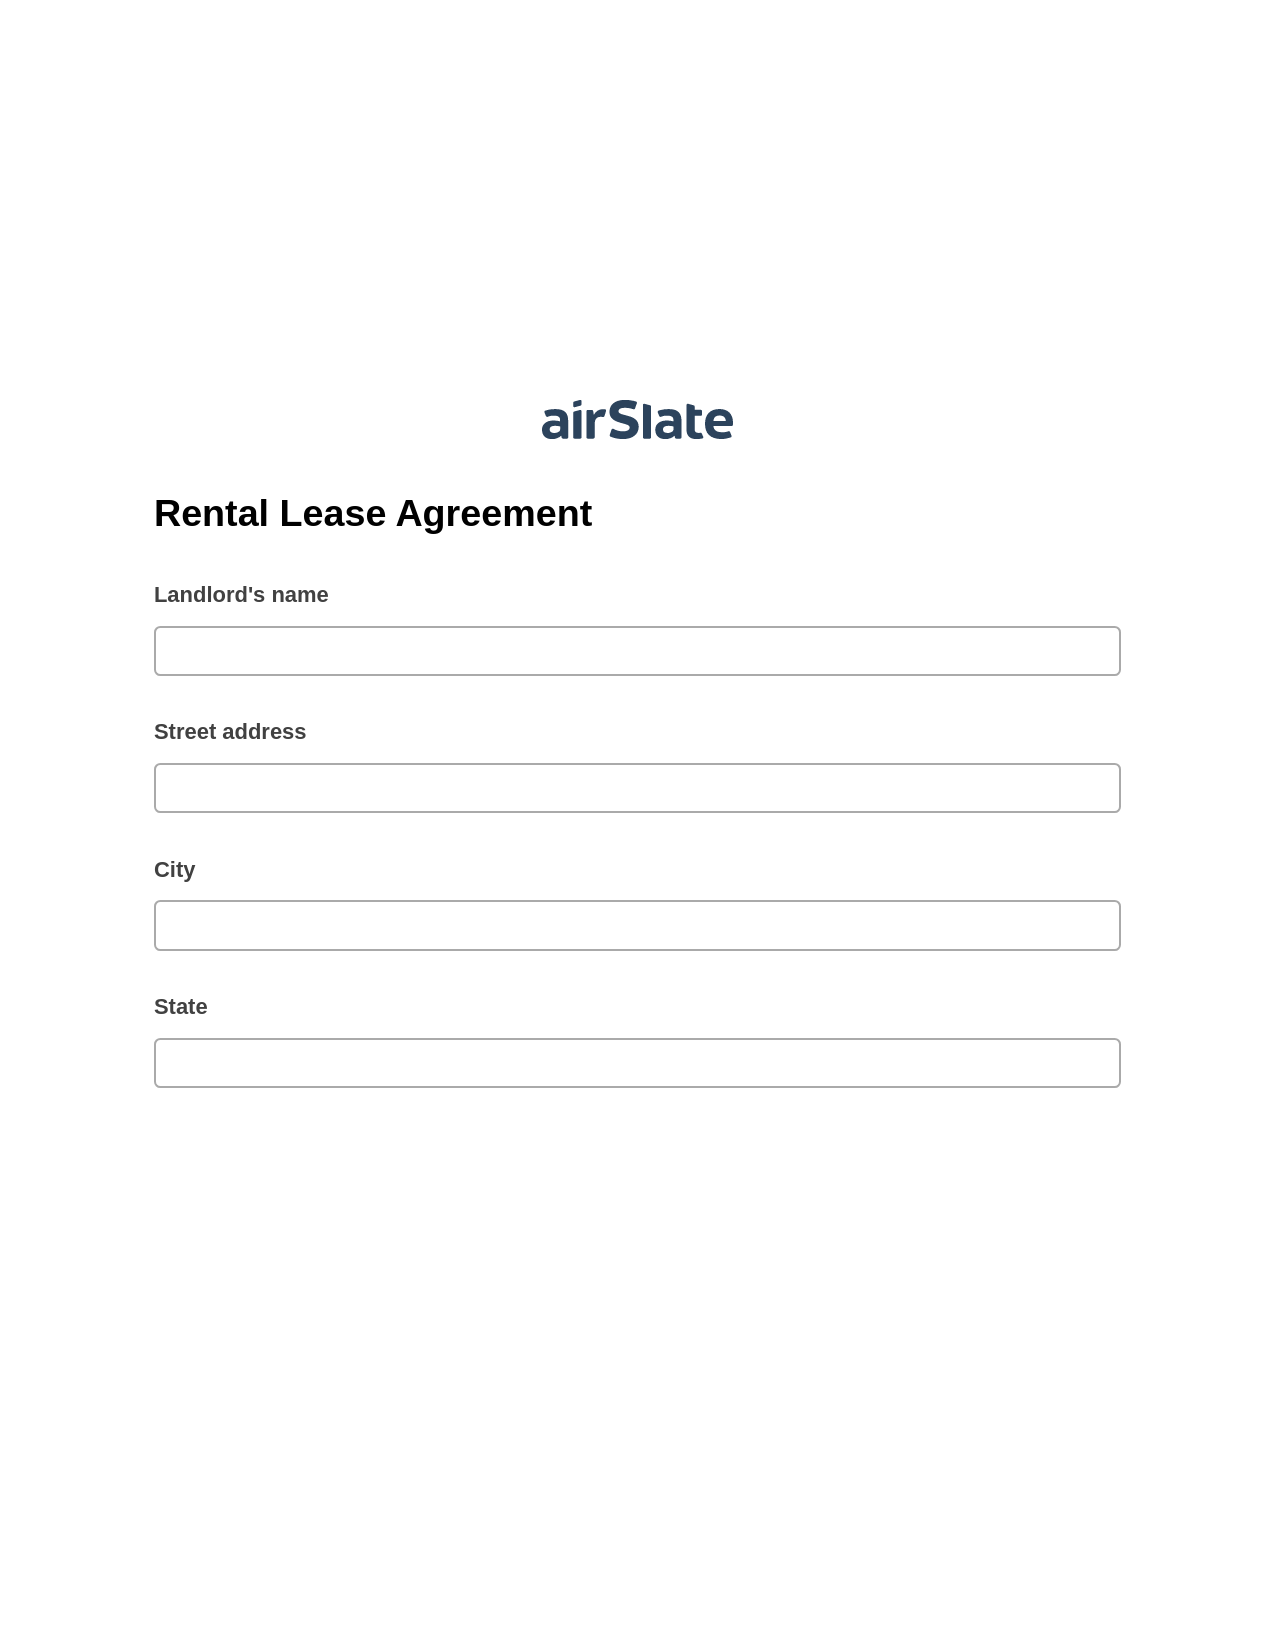 Rental Lease Agreement Pre-fill from Google Sheet Dropdown Options Bot, Create slate addon, Export to Salesforce Bot